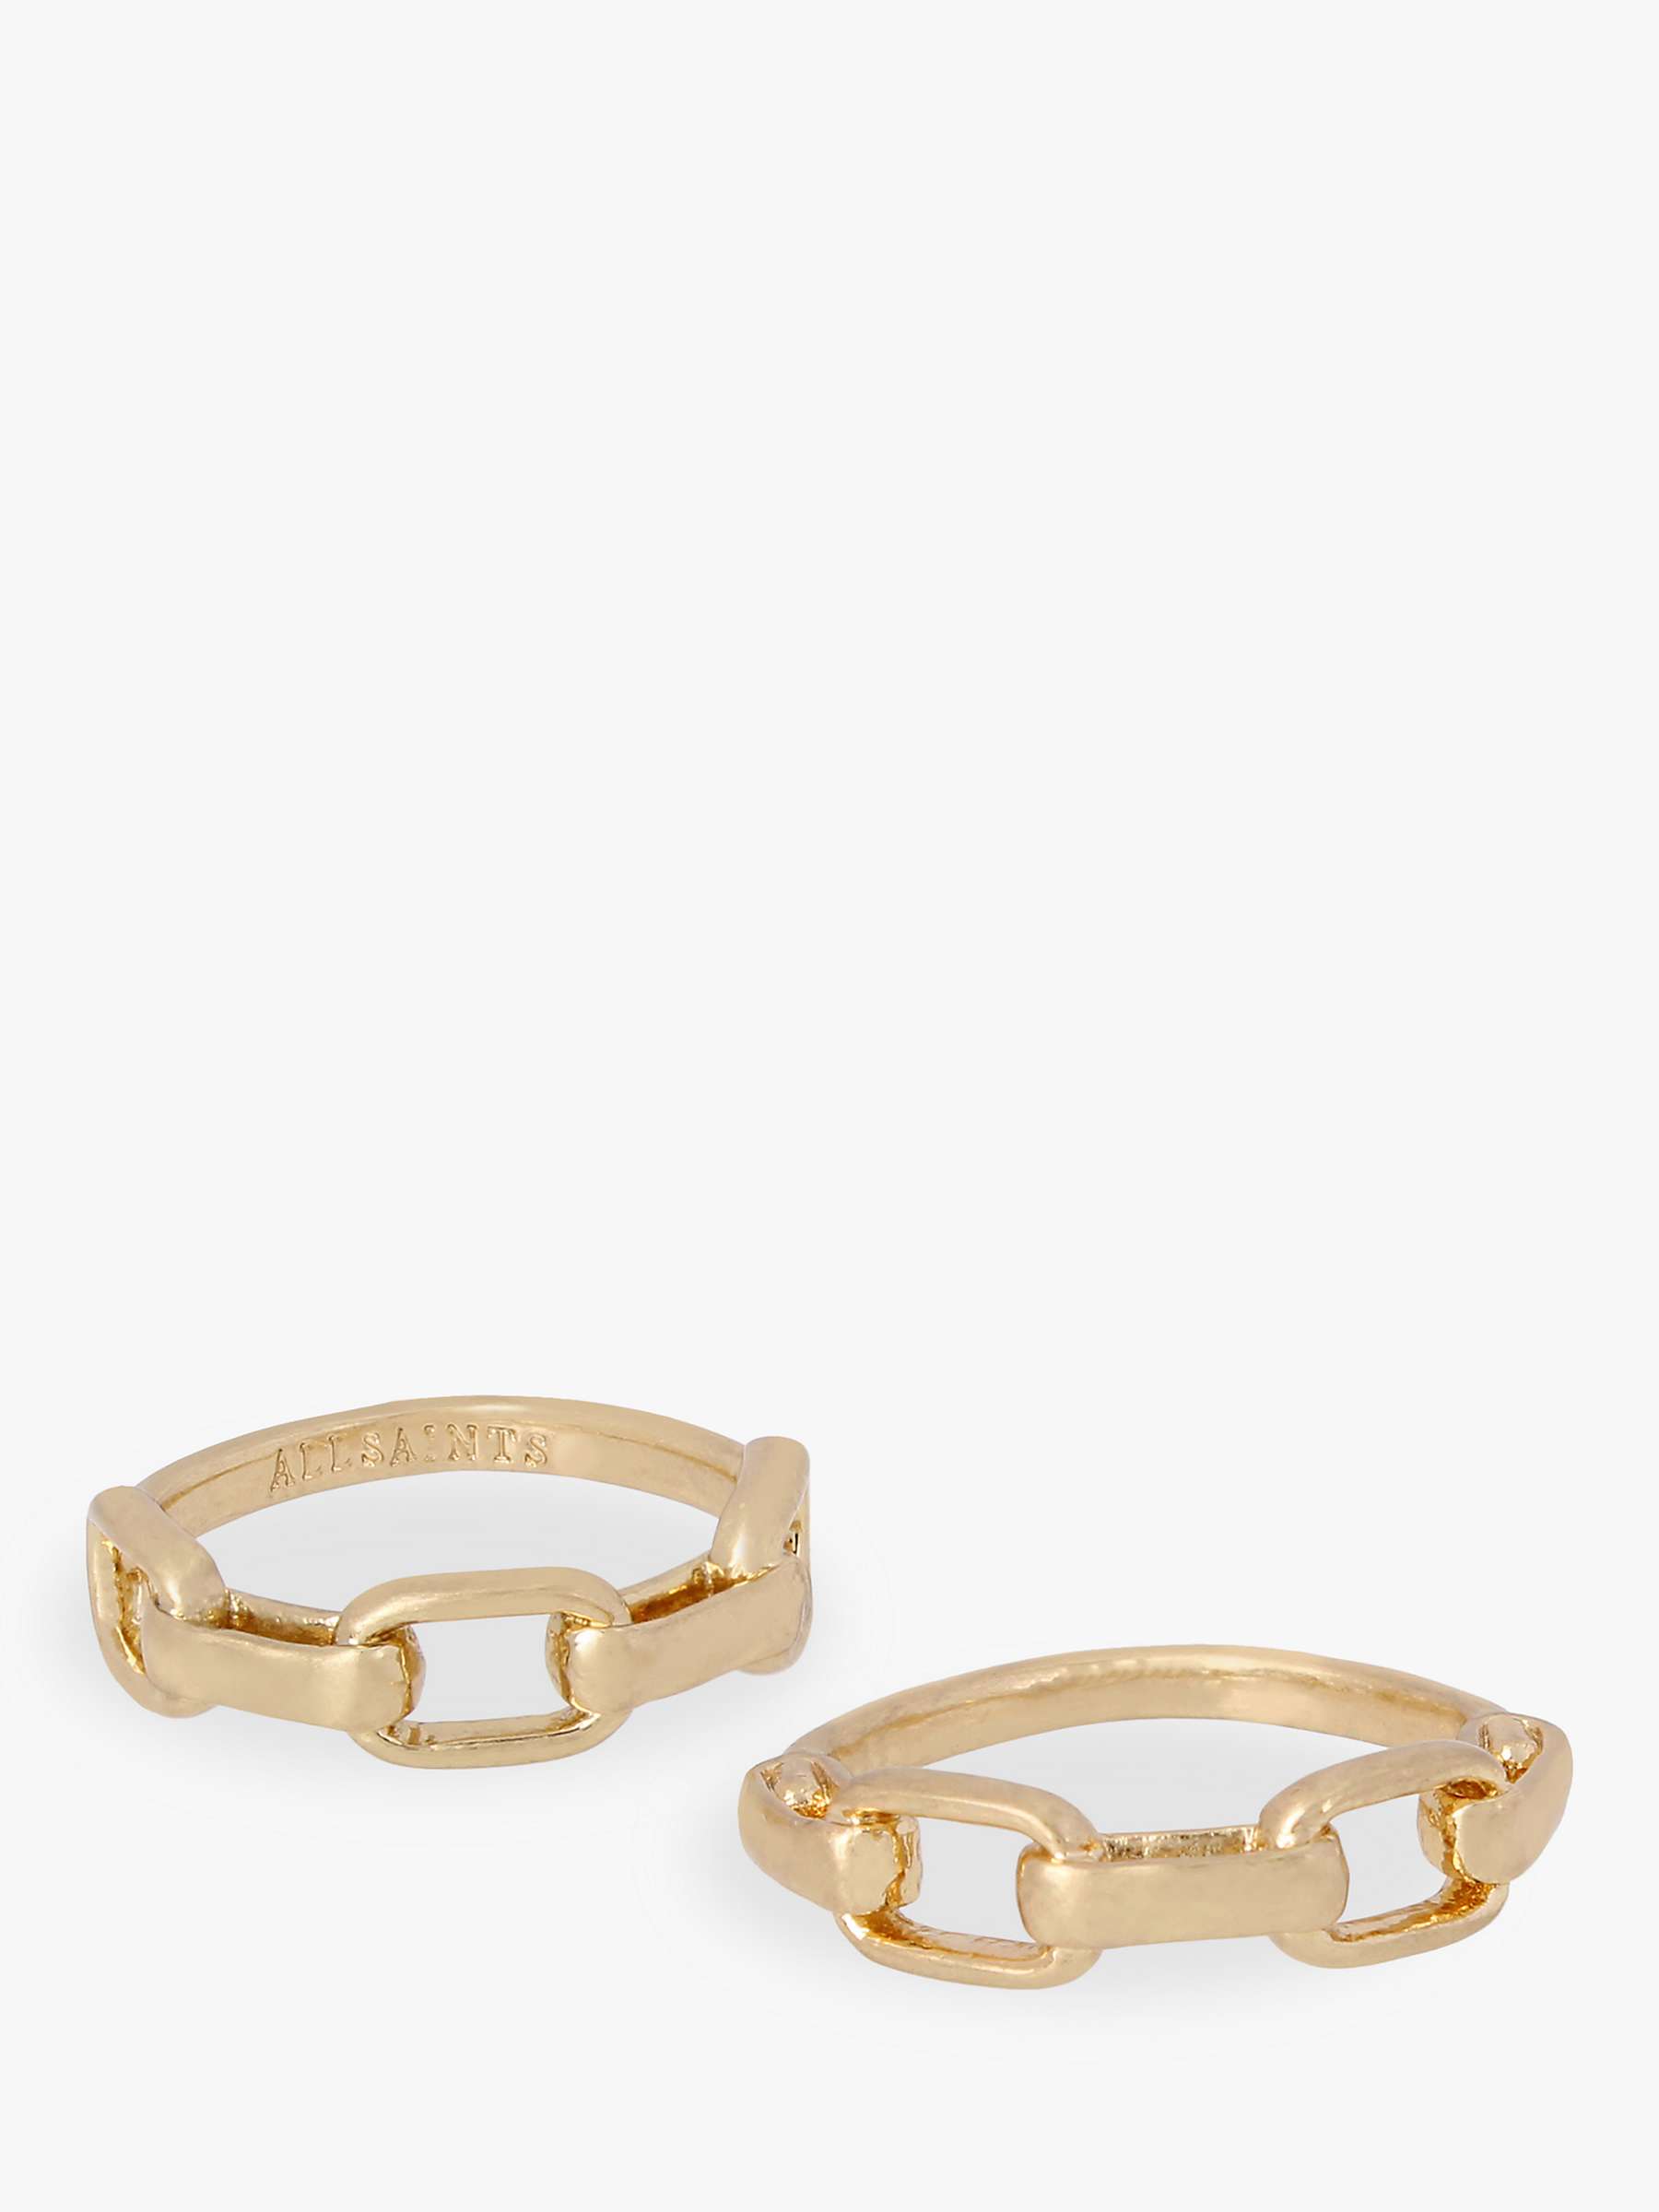 Buy AllSaints Link Stacking Rings, Warm Brass, Pack of 2 Online at johnlewis.com